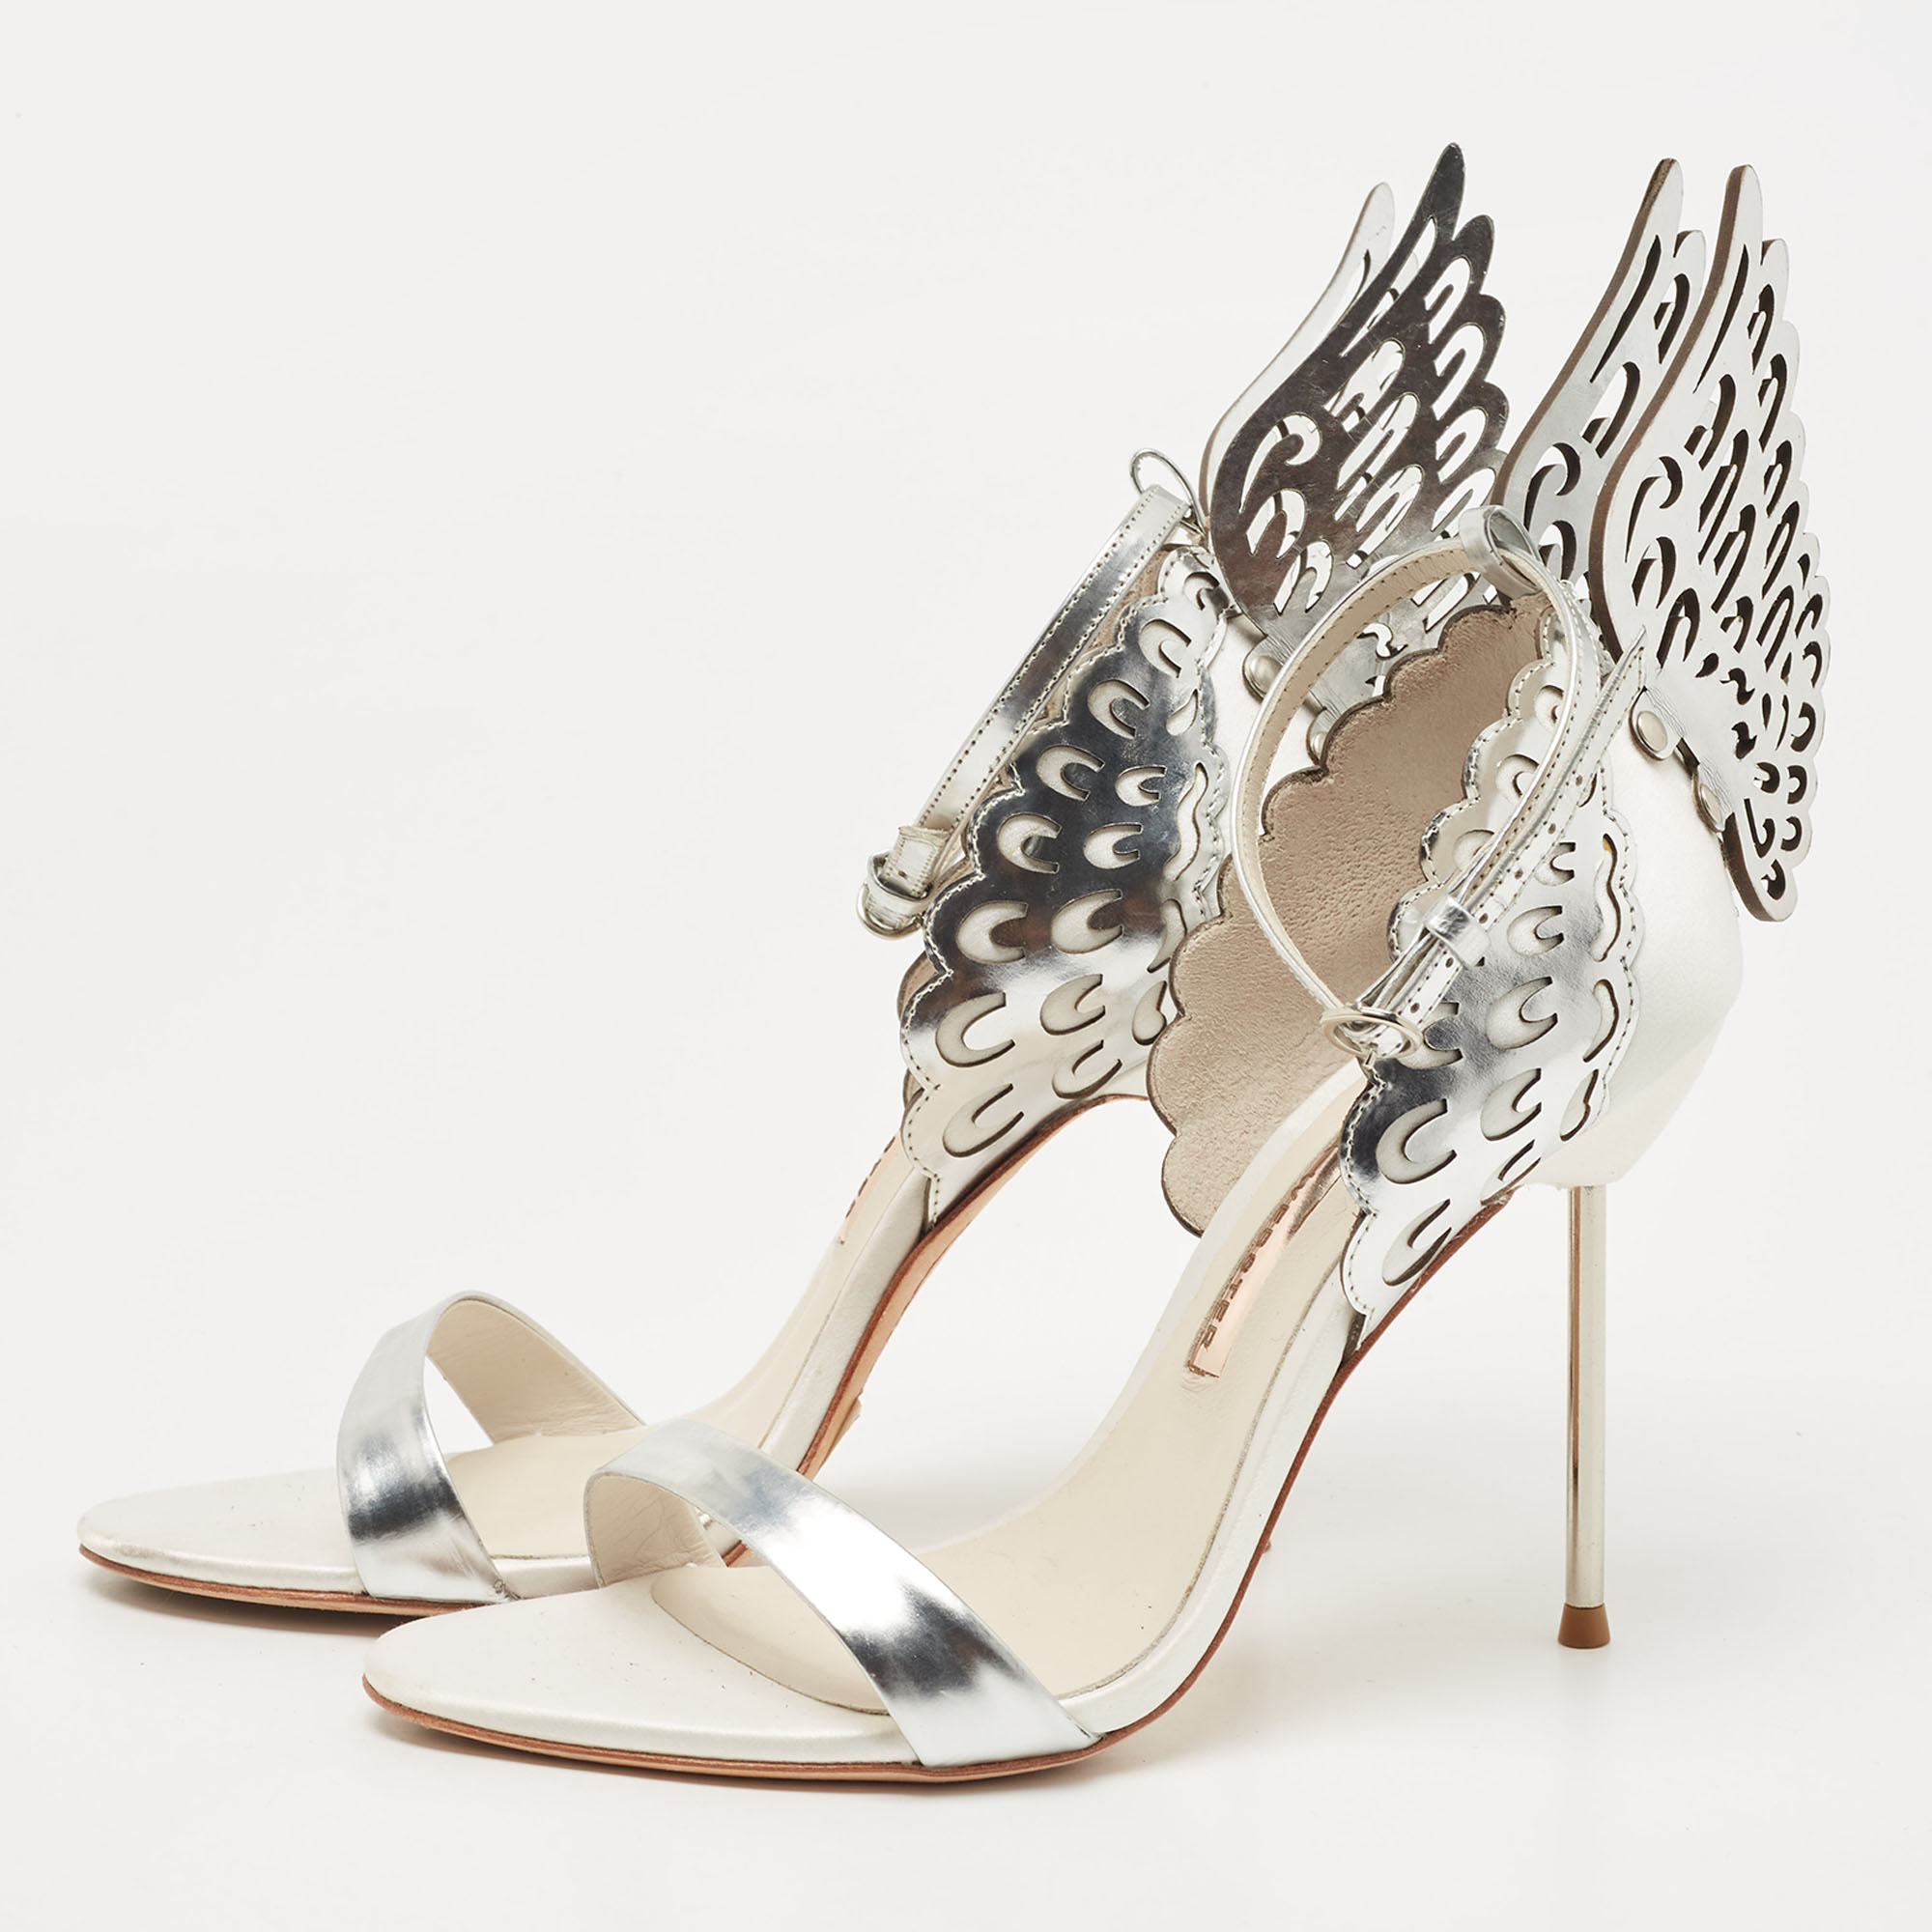 

Sophia Webster Silver/Grey Leather and Satin Chiara Sandals Size